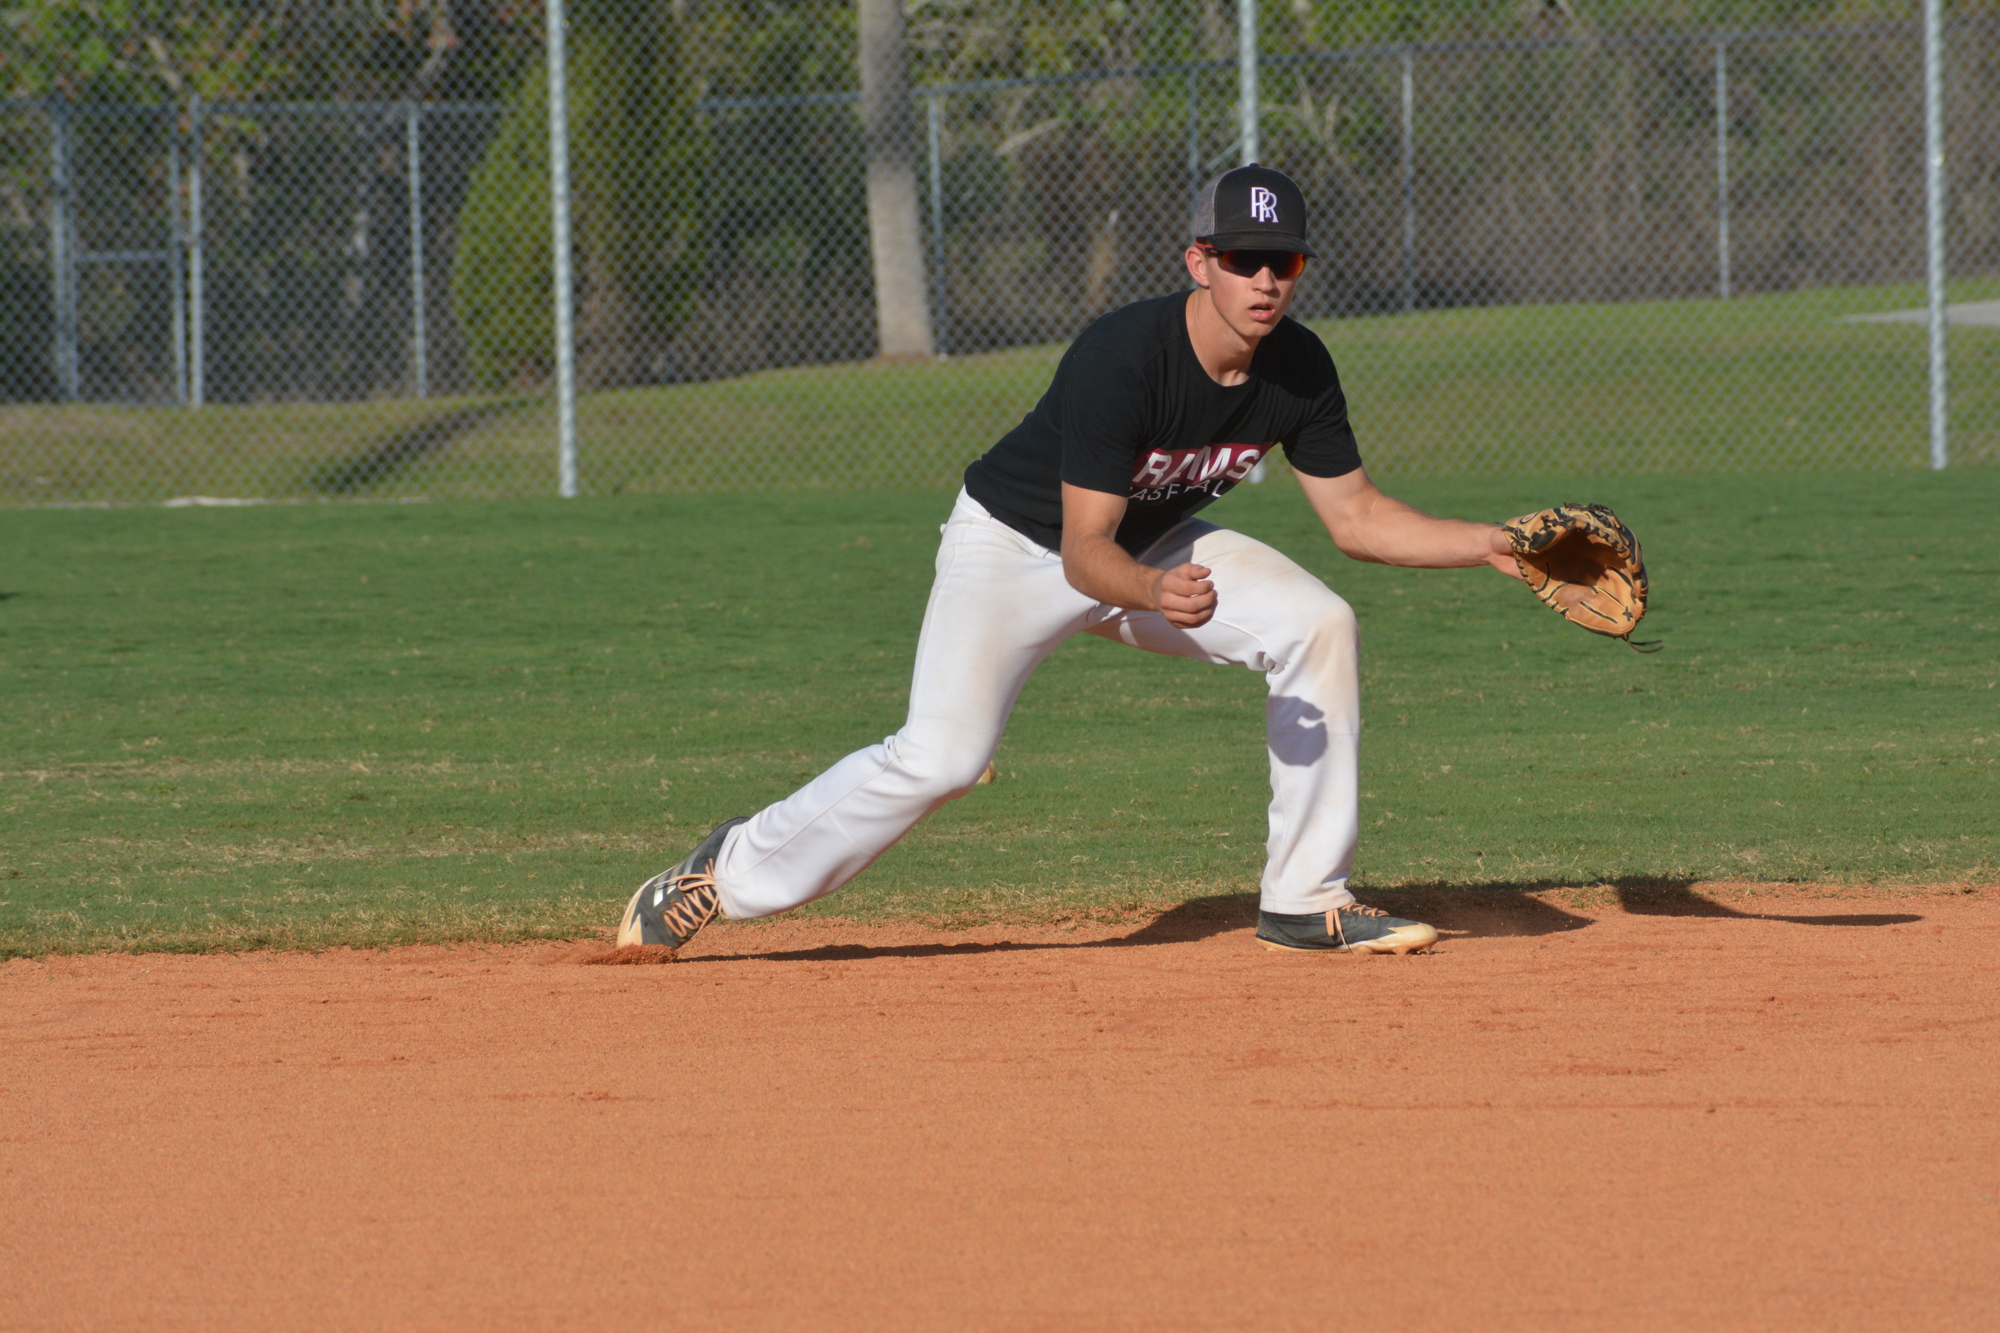 Senior shortstop Kevin Szafran partakes in infield drills at Riverview High practice.